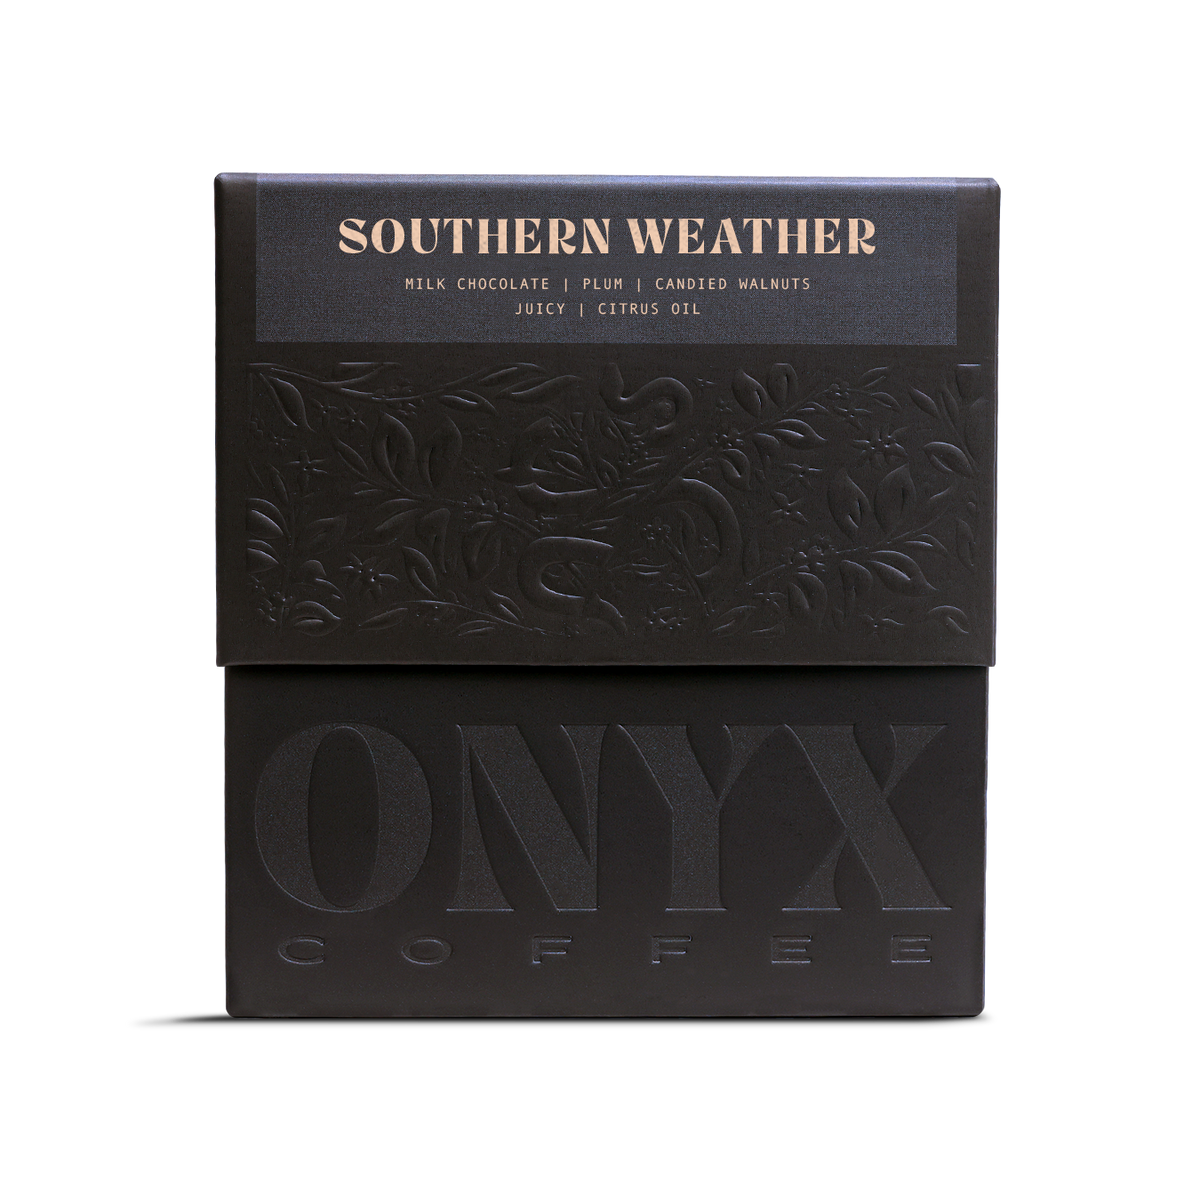 Southern Weather by Onyx Coffee Lab